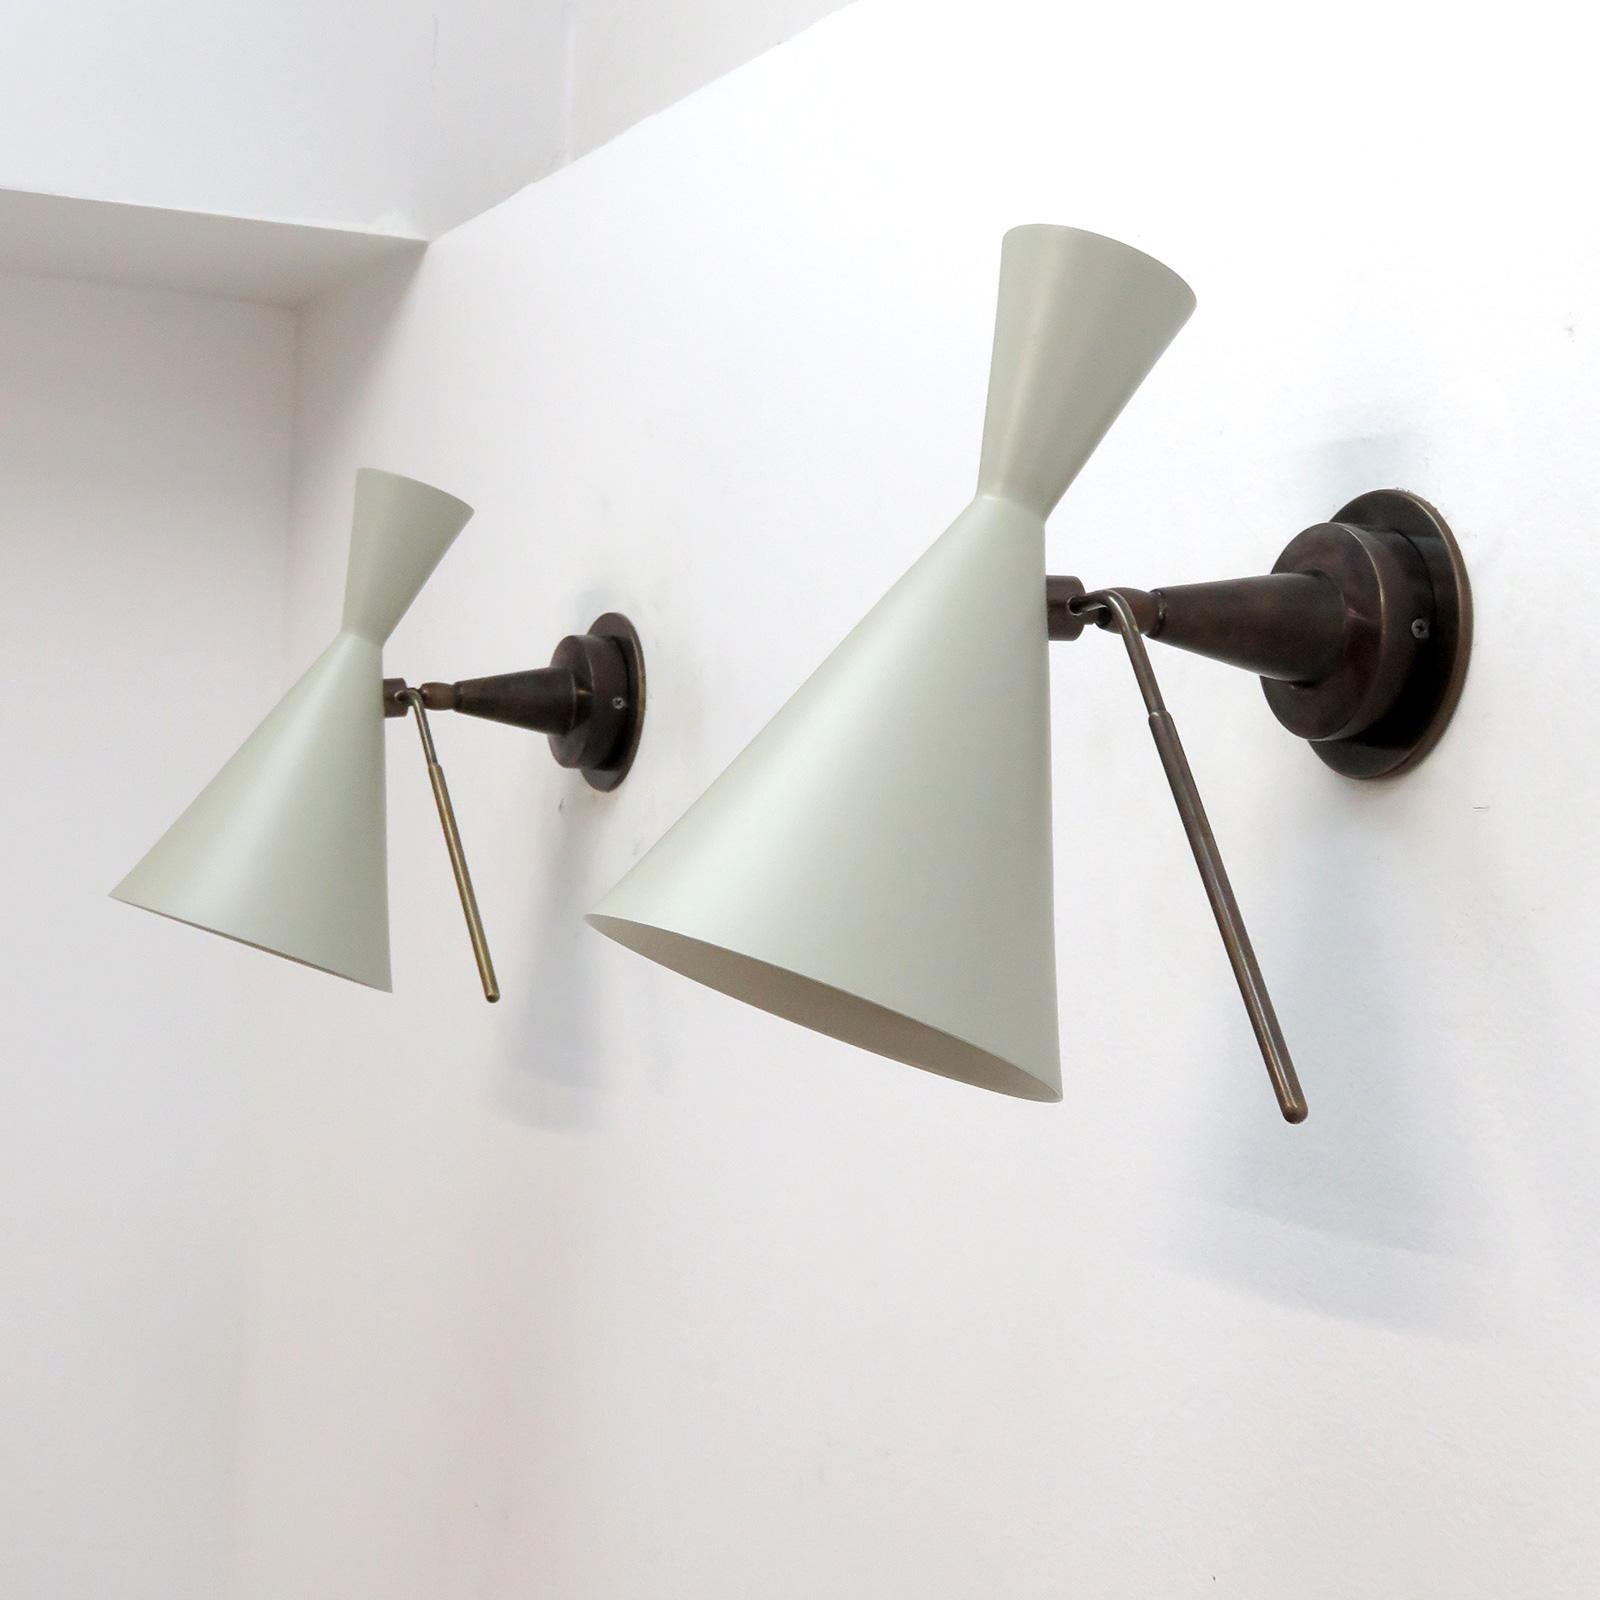 wonderful articulate Italian wall lights with off-white/light grey enameled double cone shades on dark patinaed brass armature with a pronounced handle for shade adjustment, wired for US standards, one E27 socket per fixture, max. wattage 100w each,